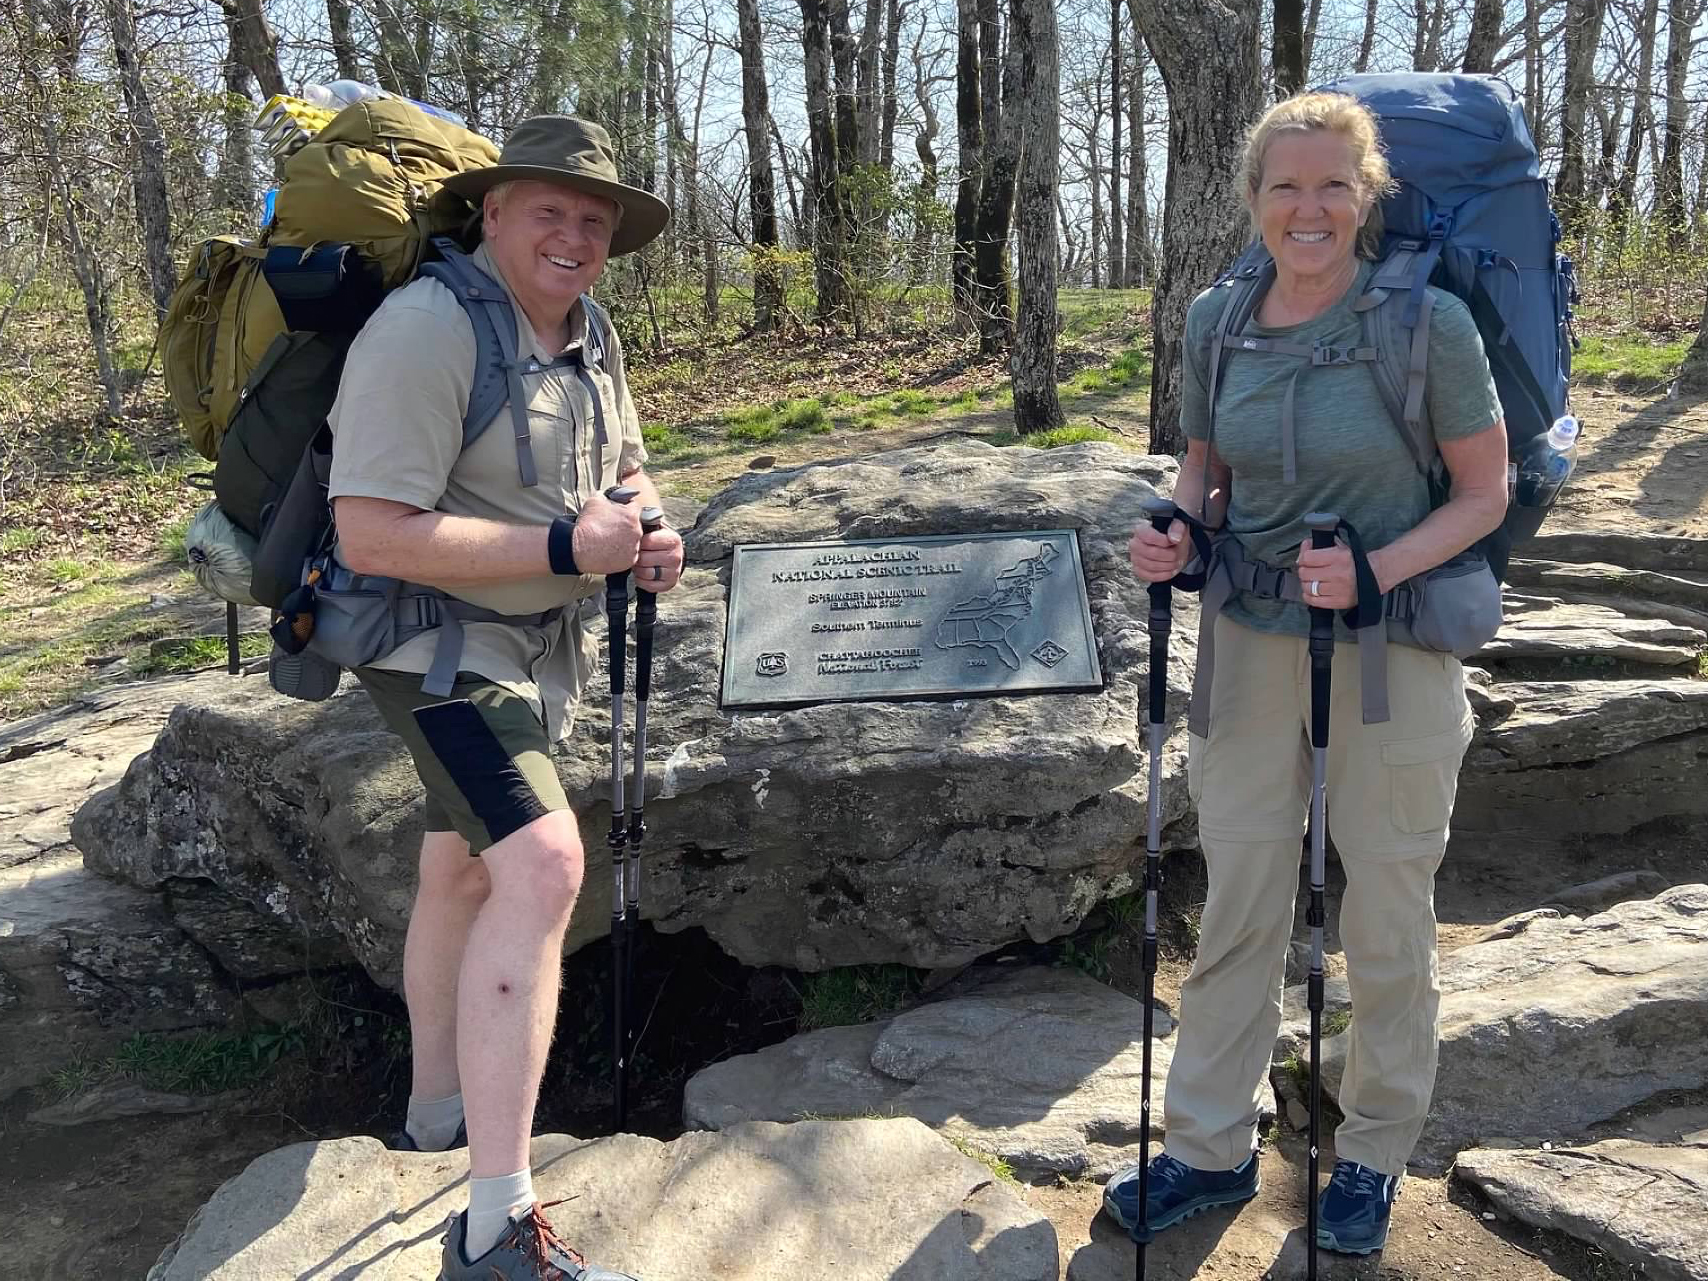 Jean (Geiger) Bussell '74 and her husband Buddy at the start of the Appalachian Trail at Springer Mountain in Georgia